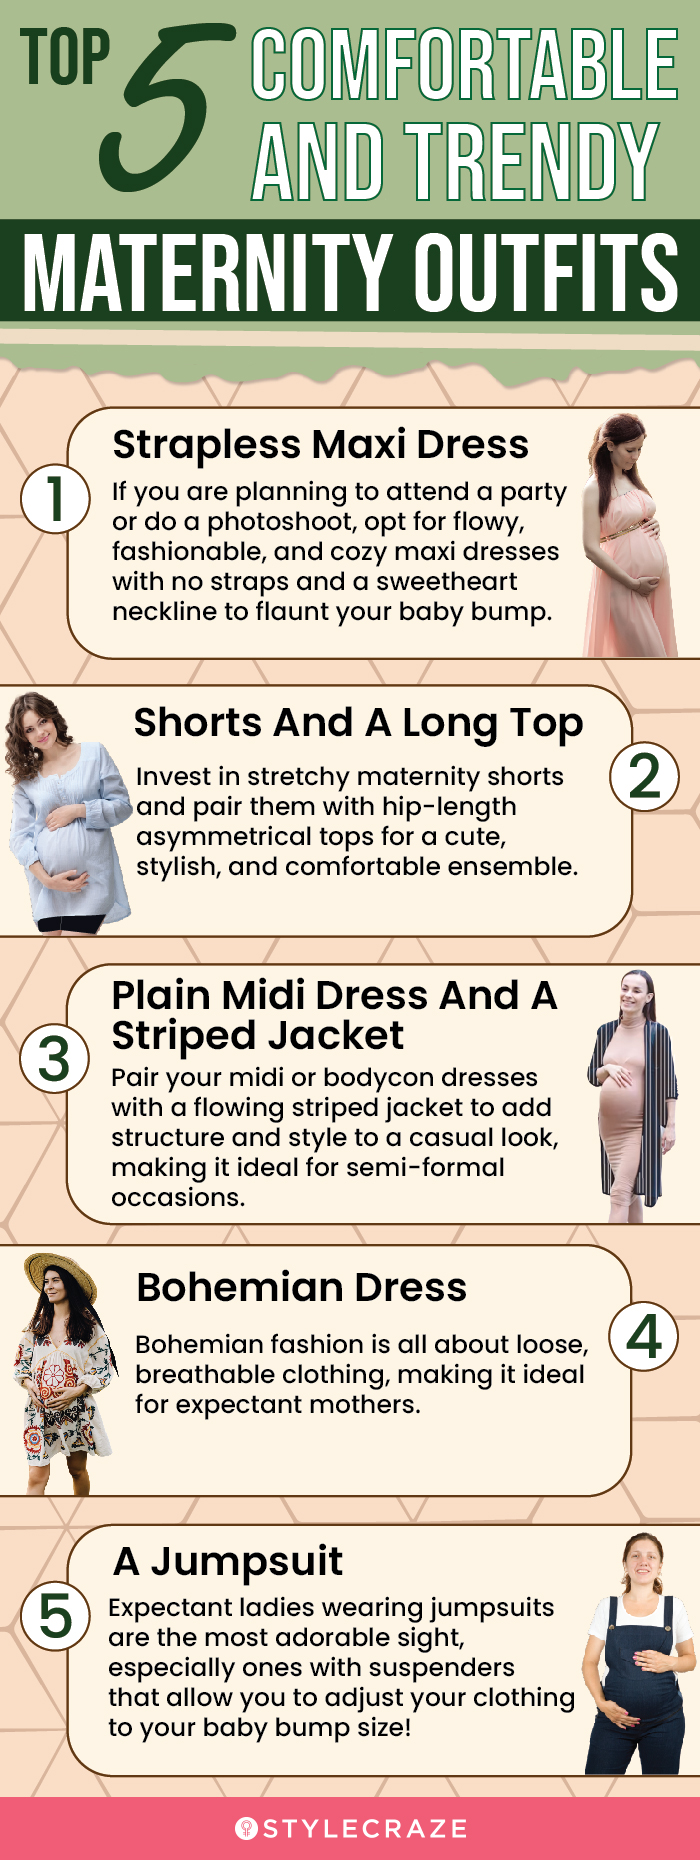 I Asked the Most Stylish Pregnant Woman I Know for Her Favorite